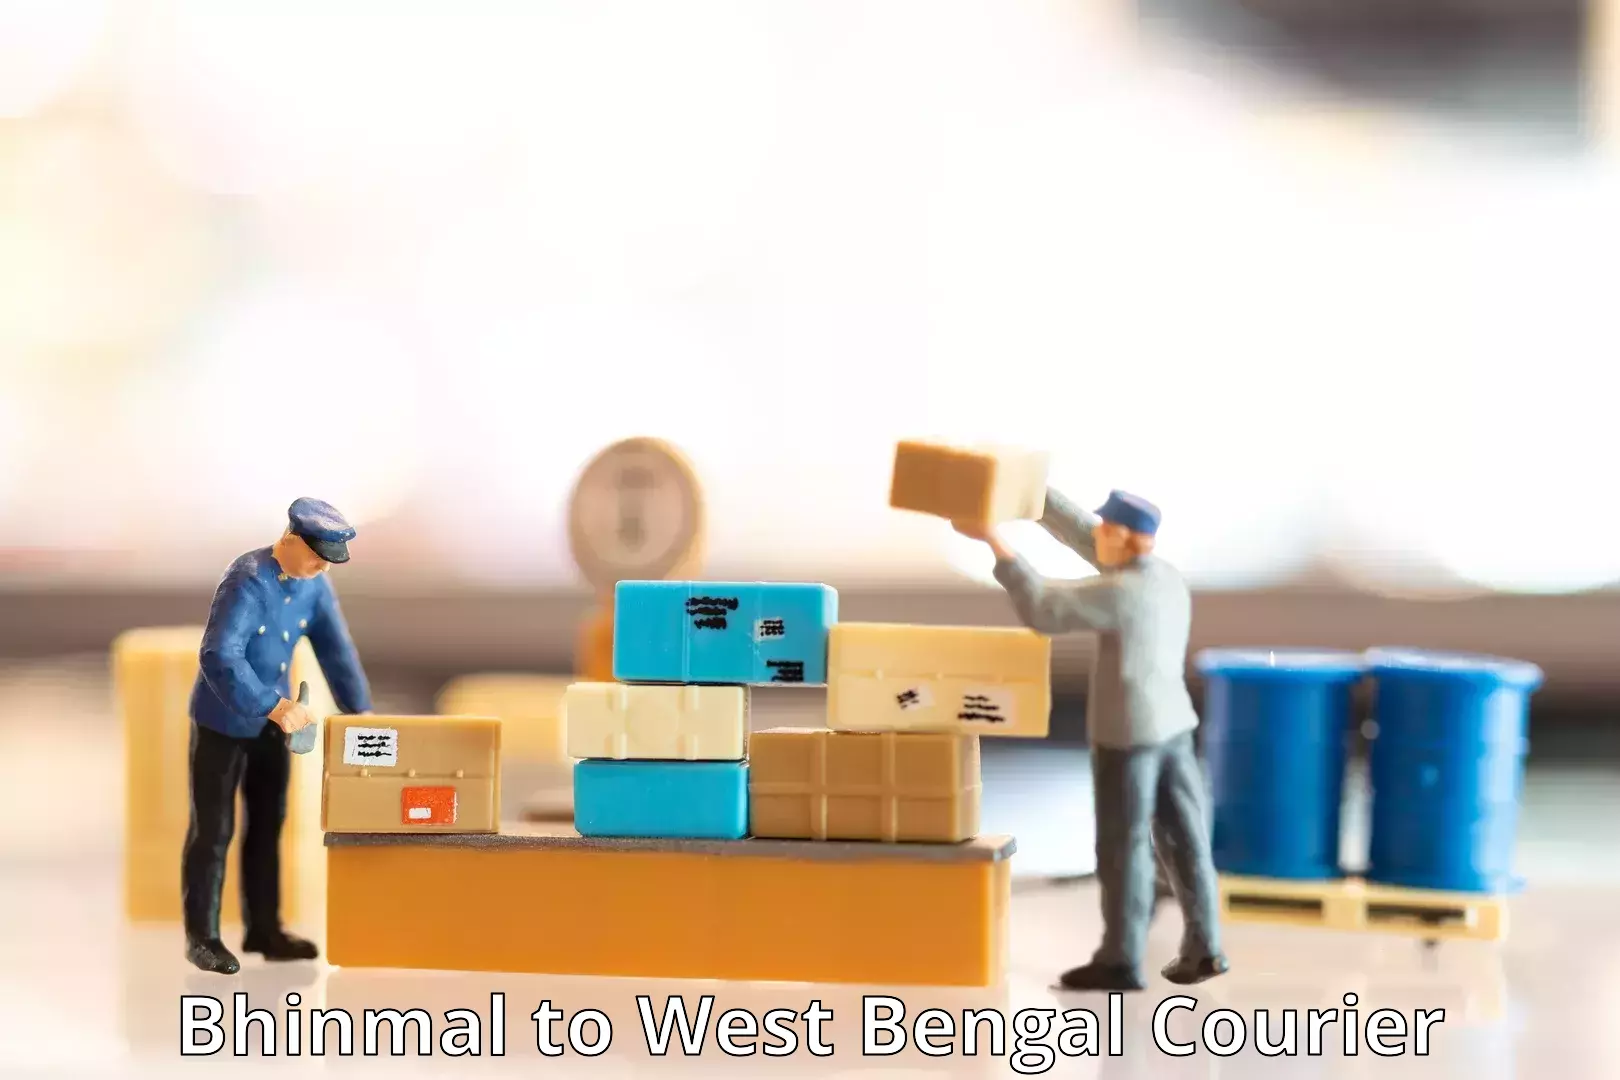 Logistics service provider Bhinmal to West Bengal